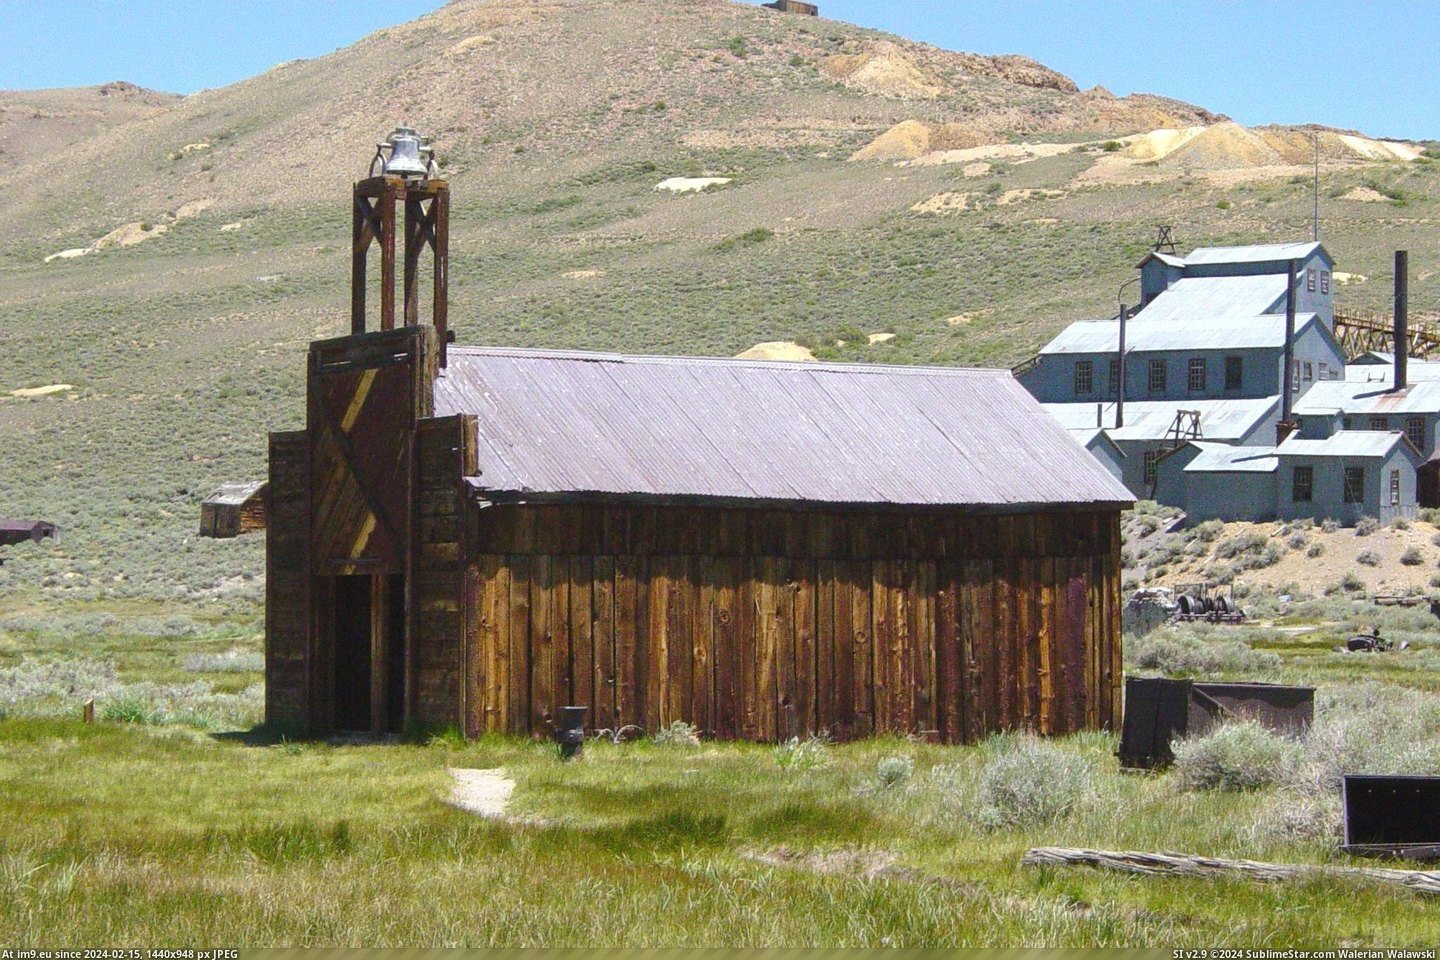 #California #Firehouse #Bodie Firehouse In Bodie, California Pic. (Изображение из альбом Bodie - a ghost town in Eastern California))